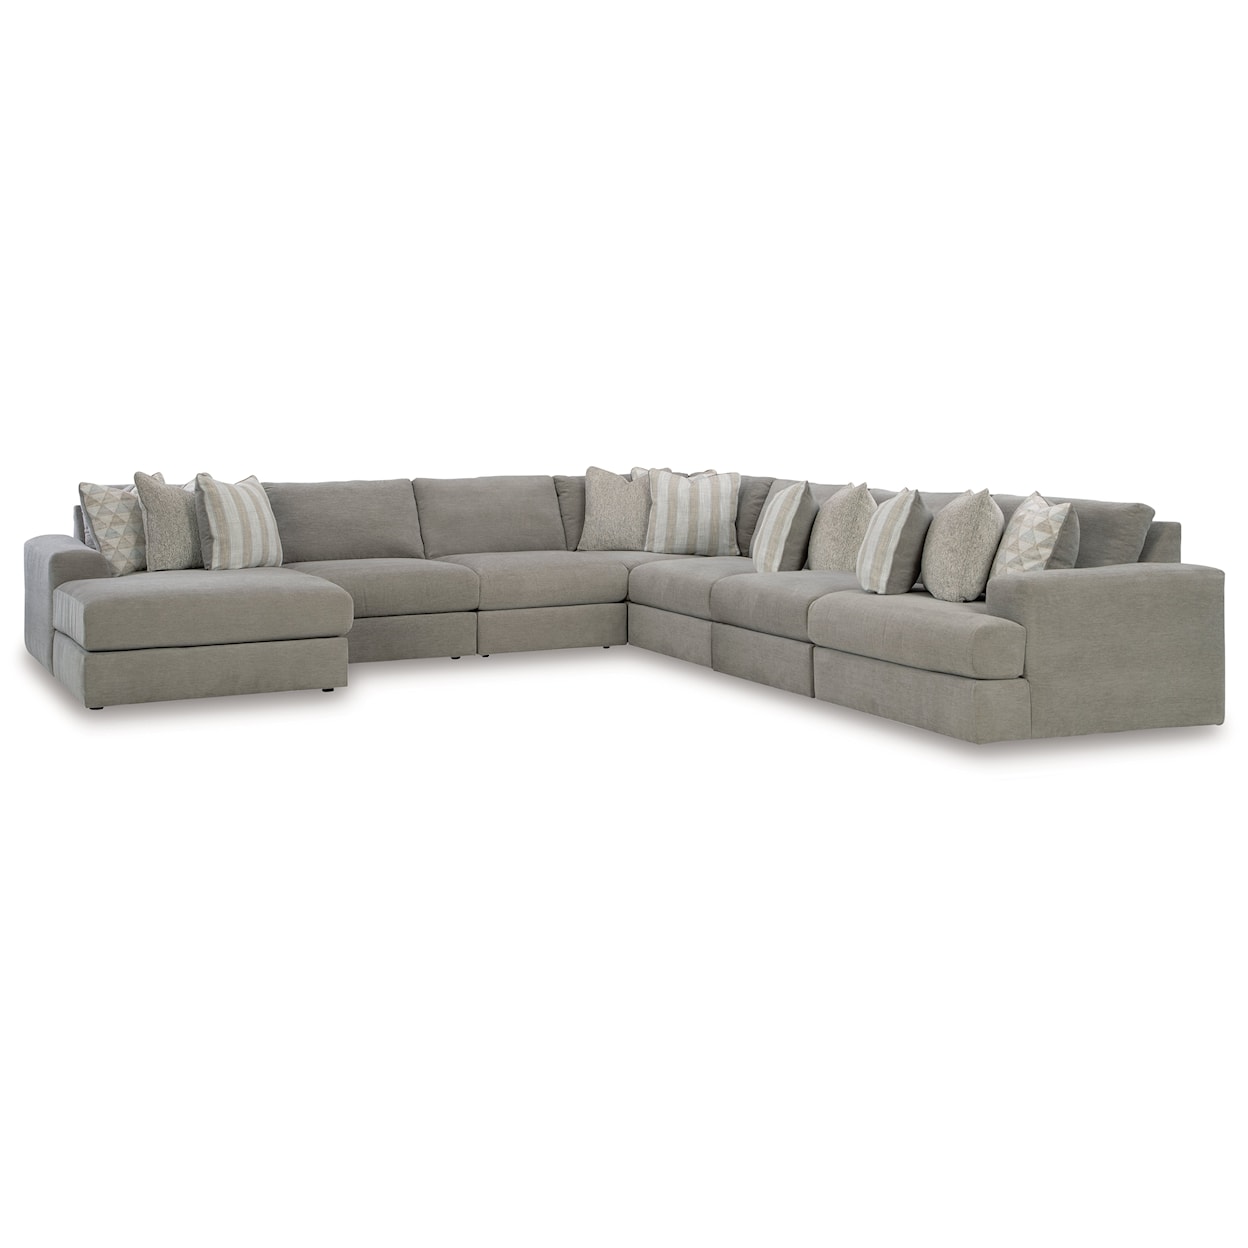 Ashley Furniture Signature Design Avaliyah 7-Piece Sectional with Chaise